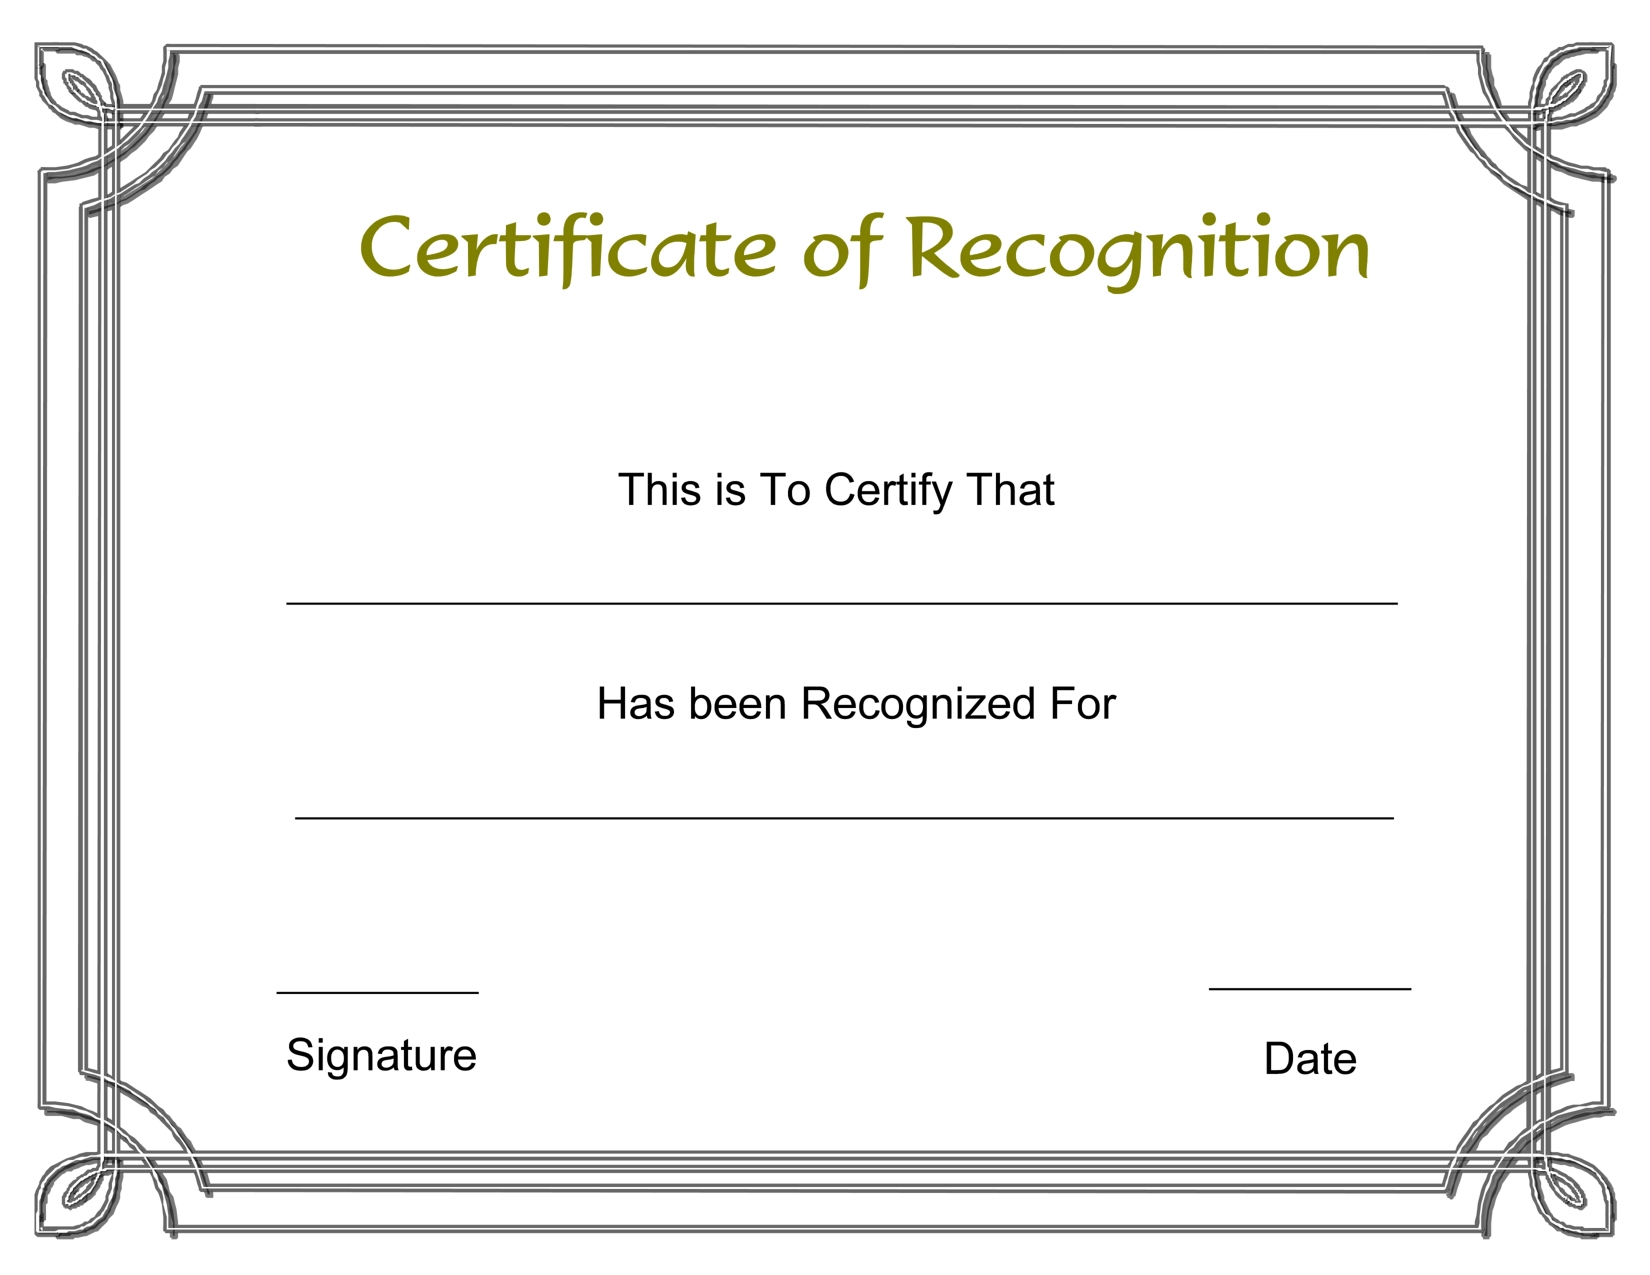 Certificate Template Recognition | Safebest.xyz For Best Employee Award Certificate Templates